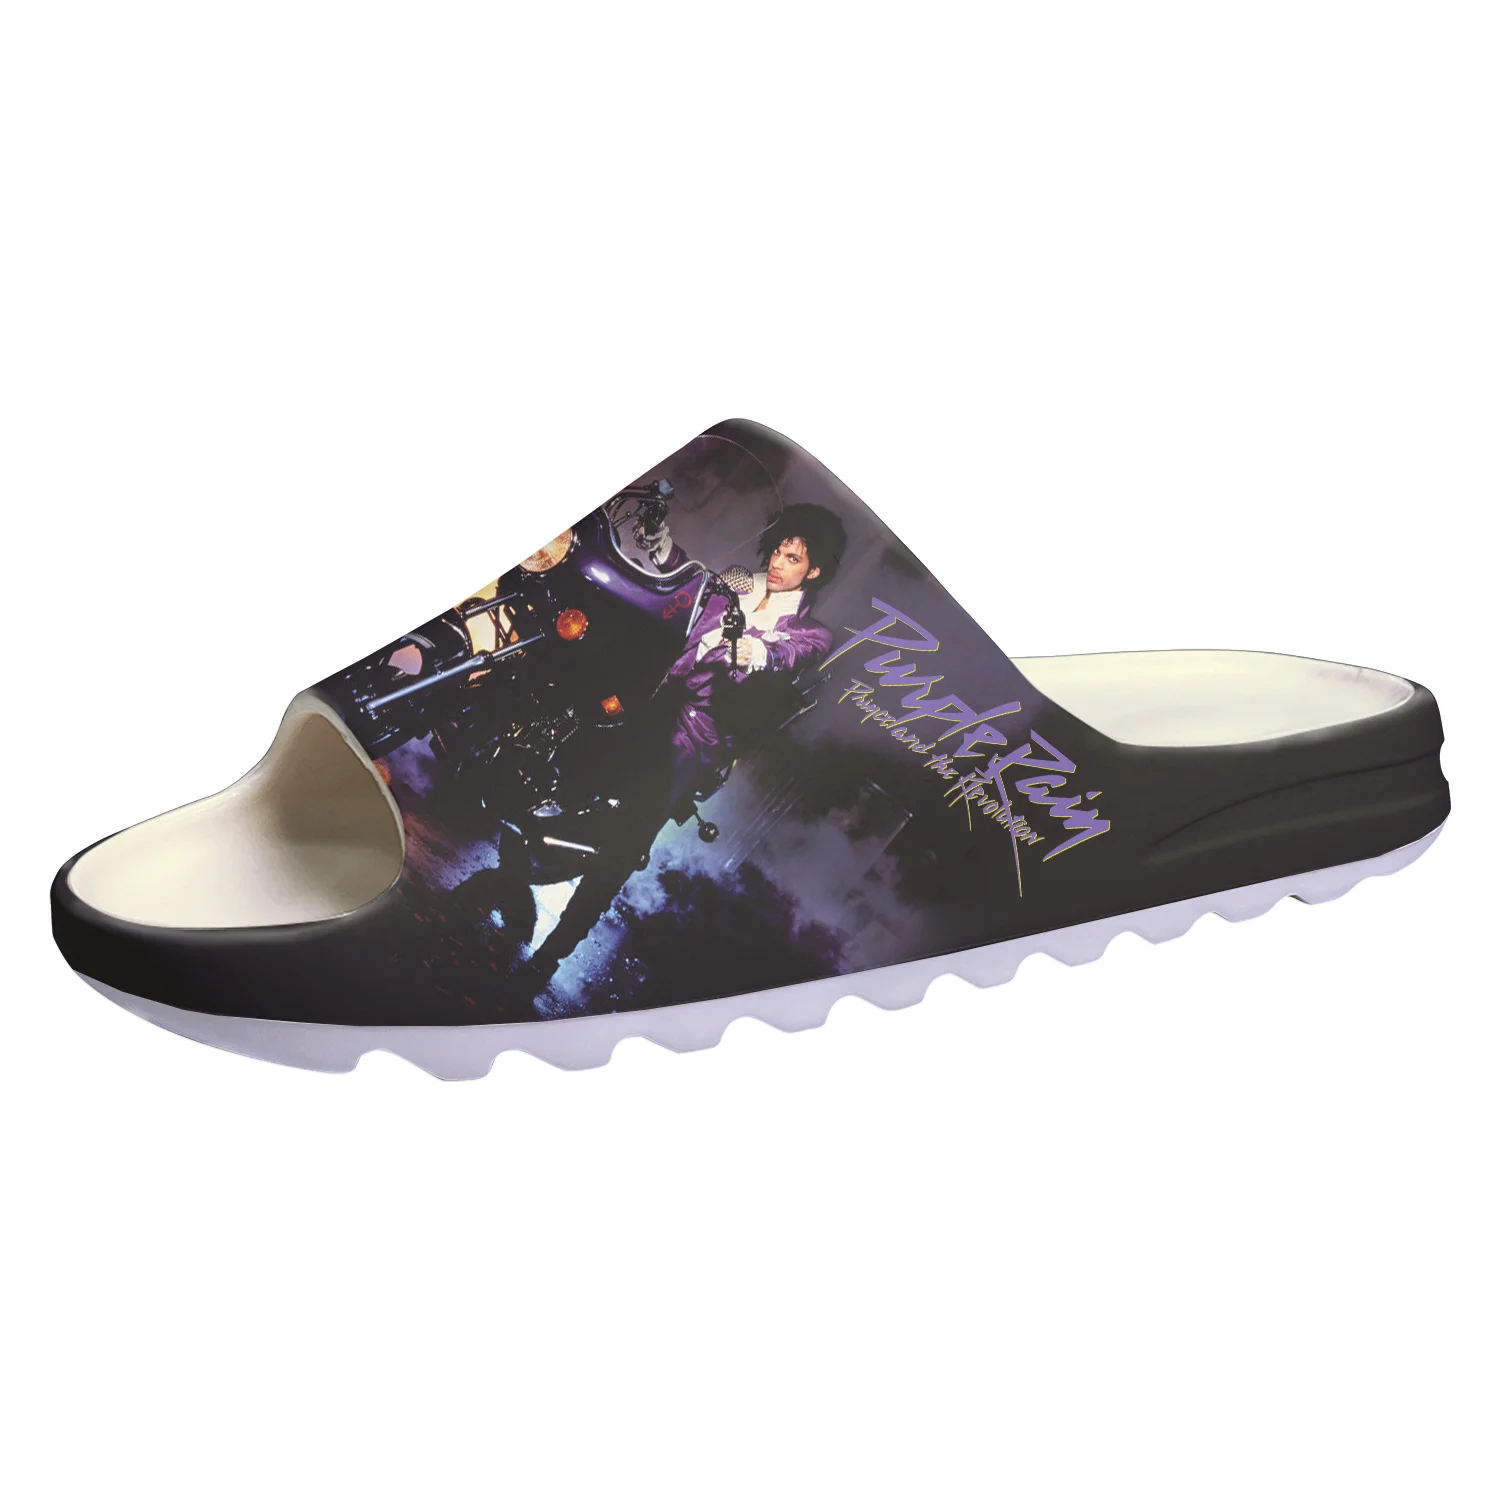 

Prince Rogers Nelson Purple Rain Singer Soft Sole Sllipers Home Clogs Men Women Teenager Custom Made Sandals Water Shit Step in